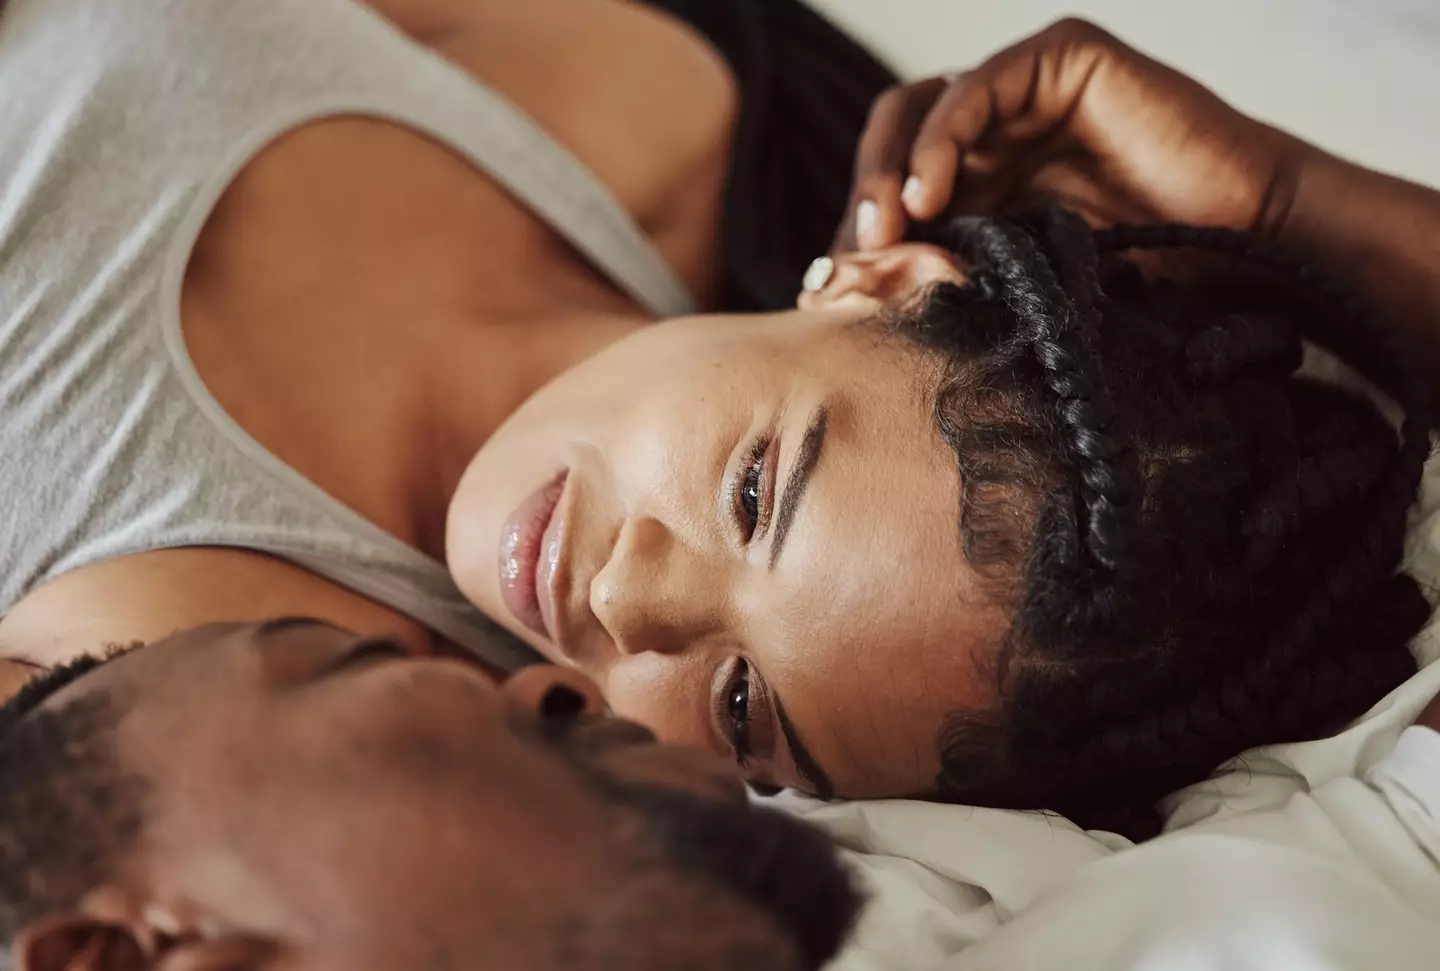 Stacked orgasms, or any orgasm for that matter, can help enhance intimate, personal and emotional connections with your partner. (PeopleImages / Getty Images)